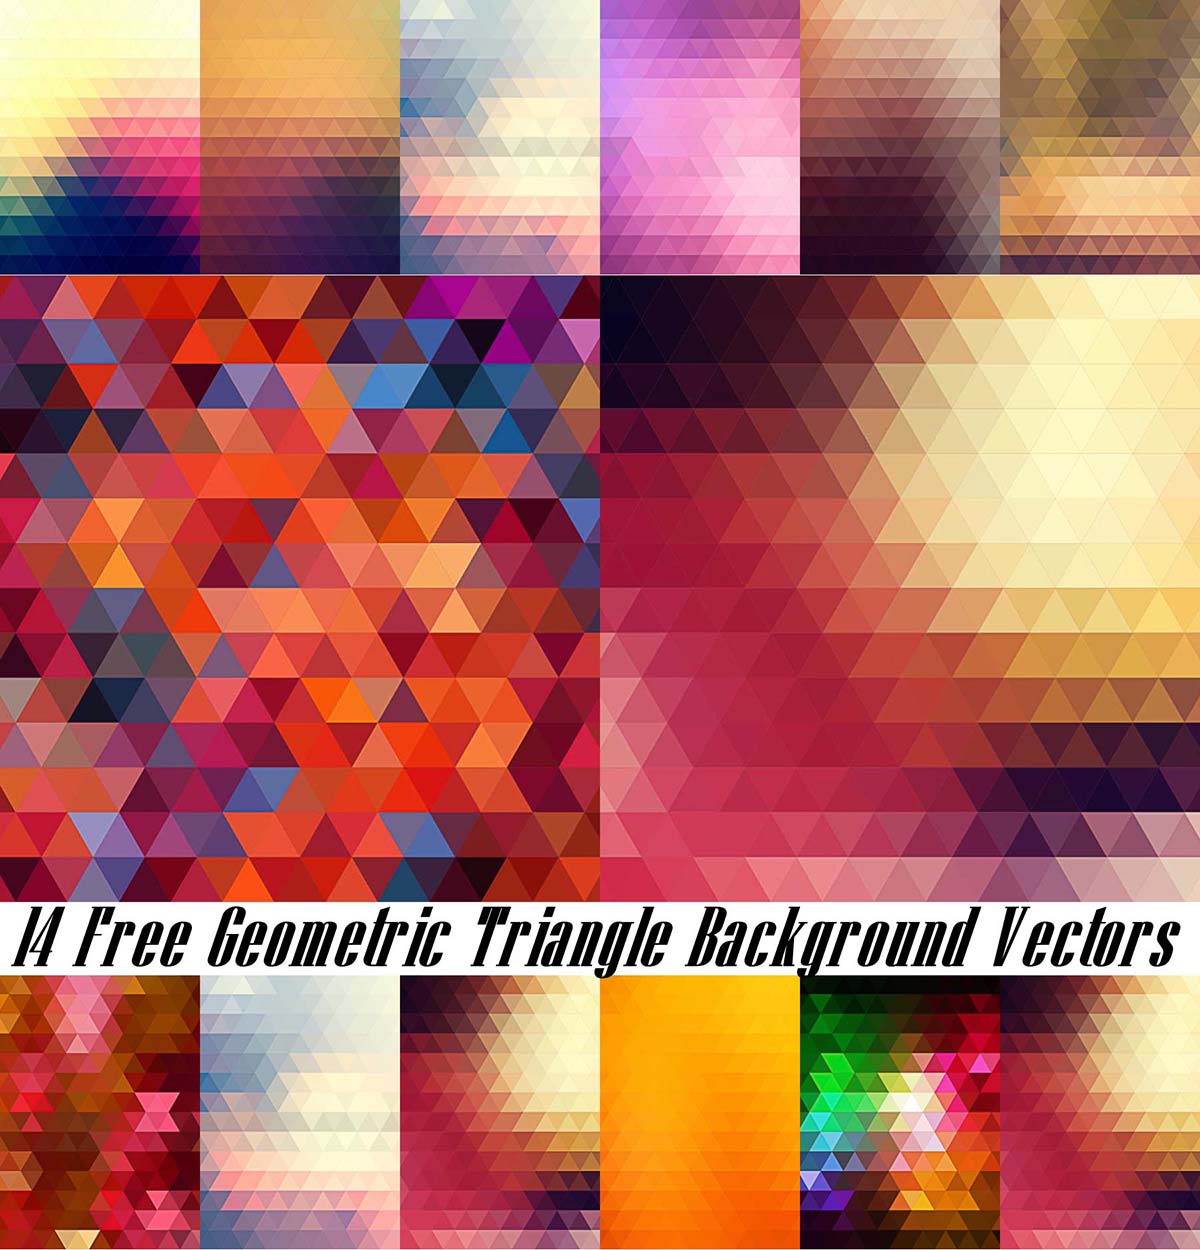 Colored triangle vector backgrounds set